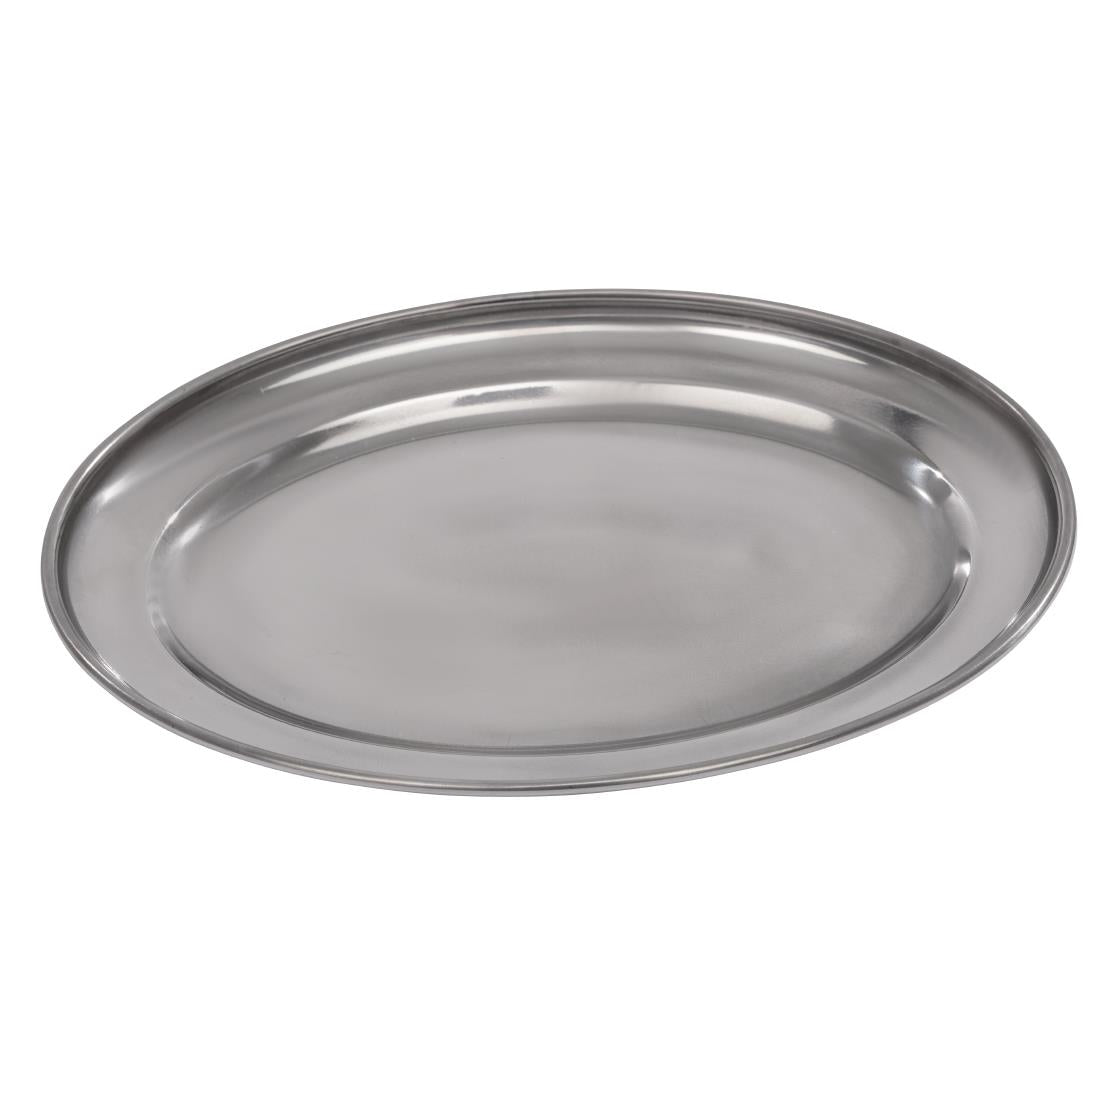 Olympia Stainless Steel Oval Serving Tray 200mm